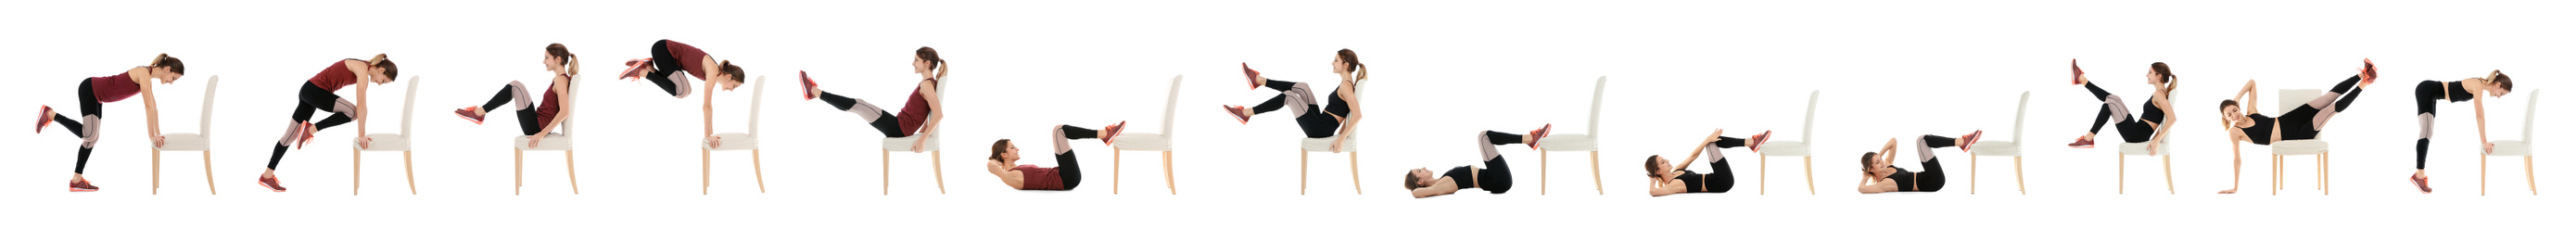 Image of Collage of young woman exercising with chair on white background. Banner design